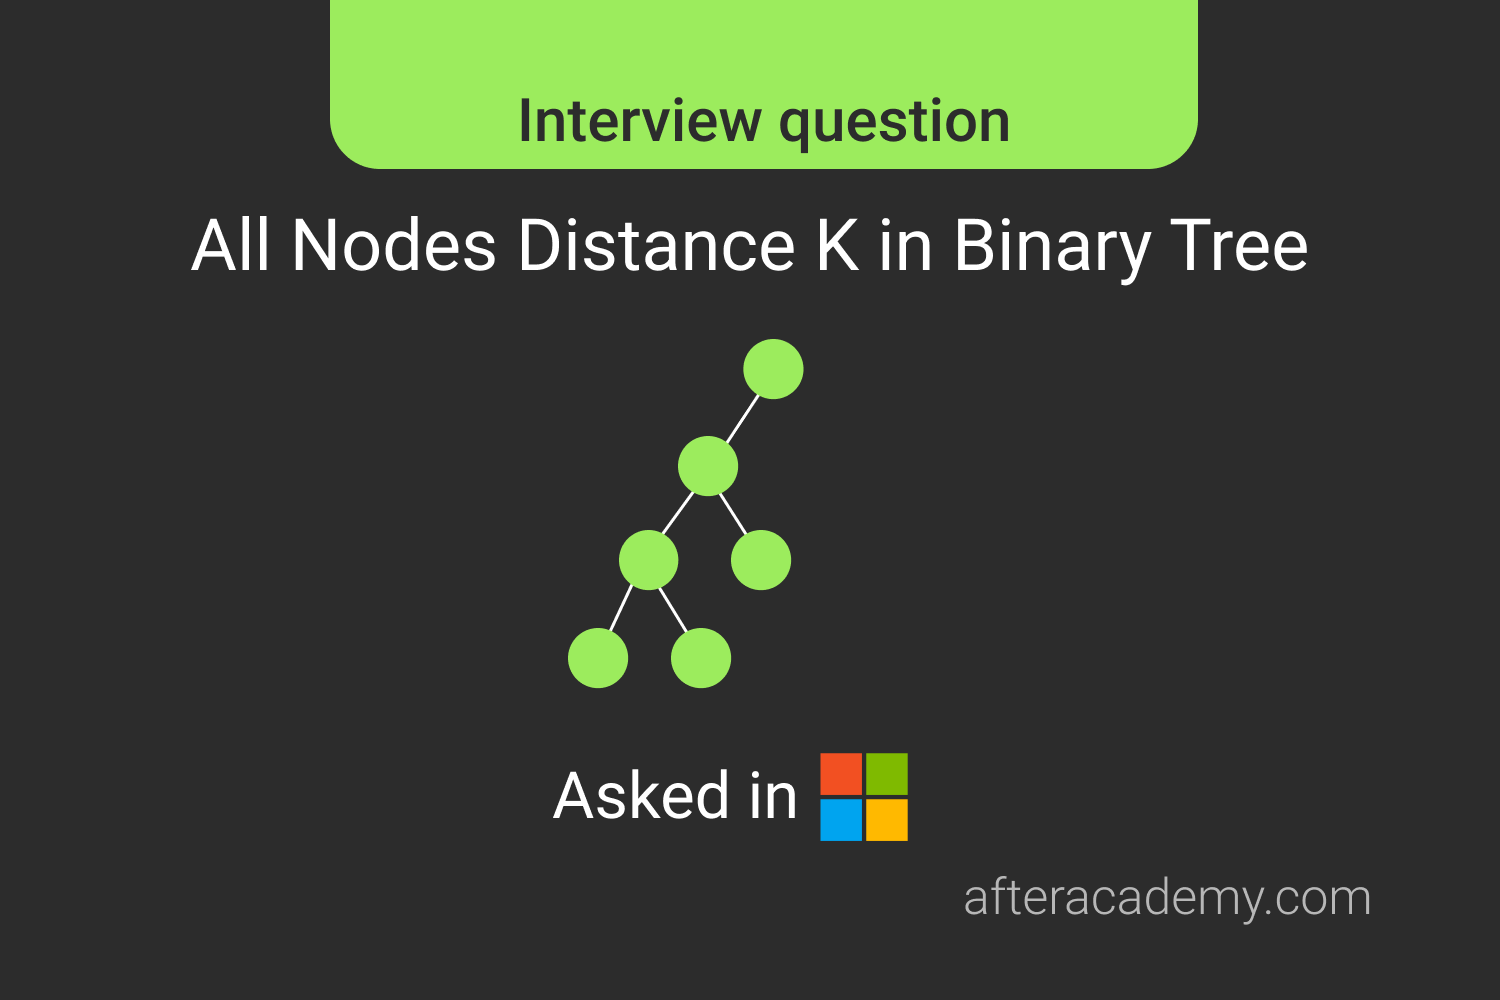 All Nodes Distance K in Binary Tree